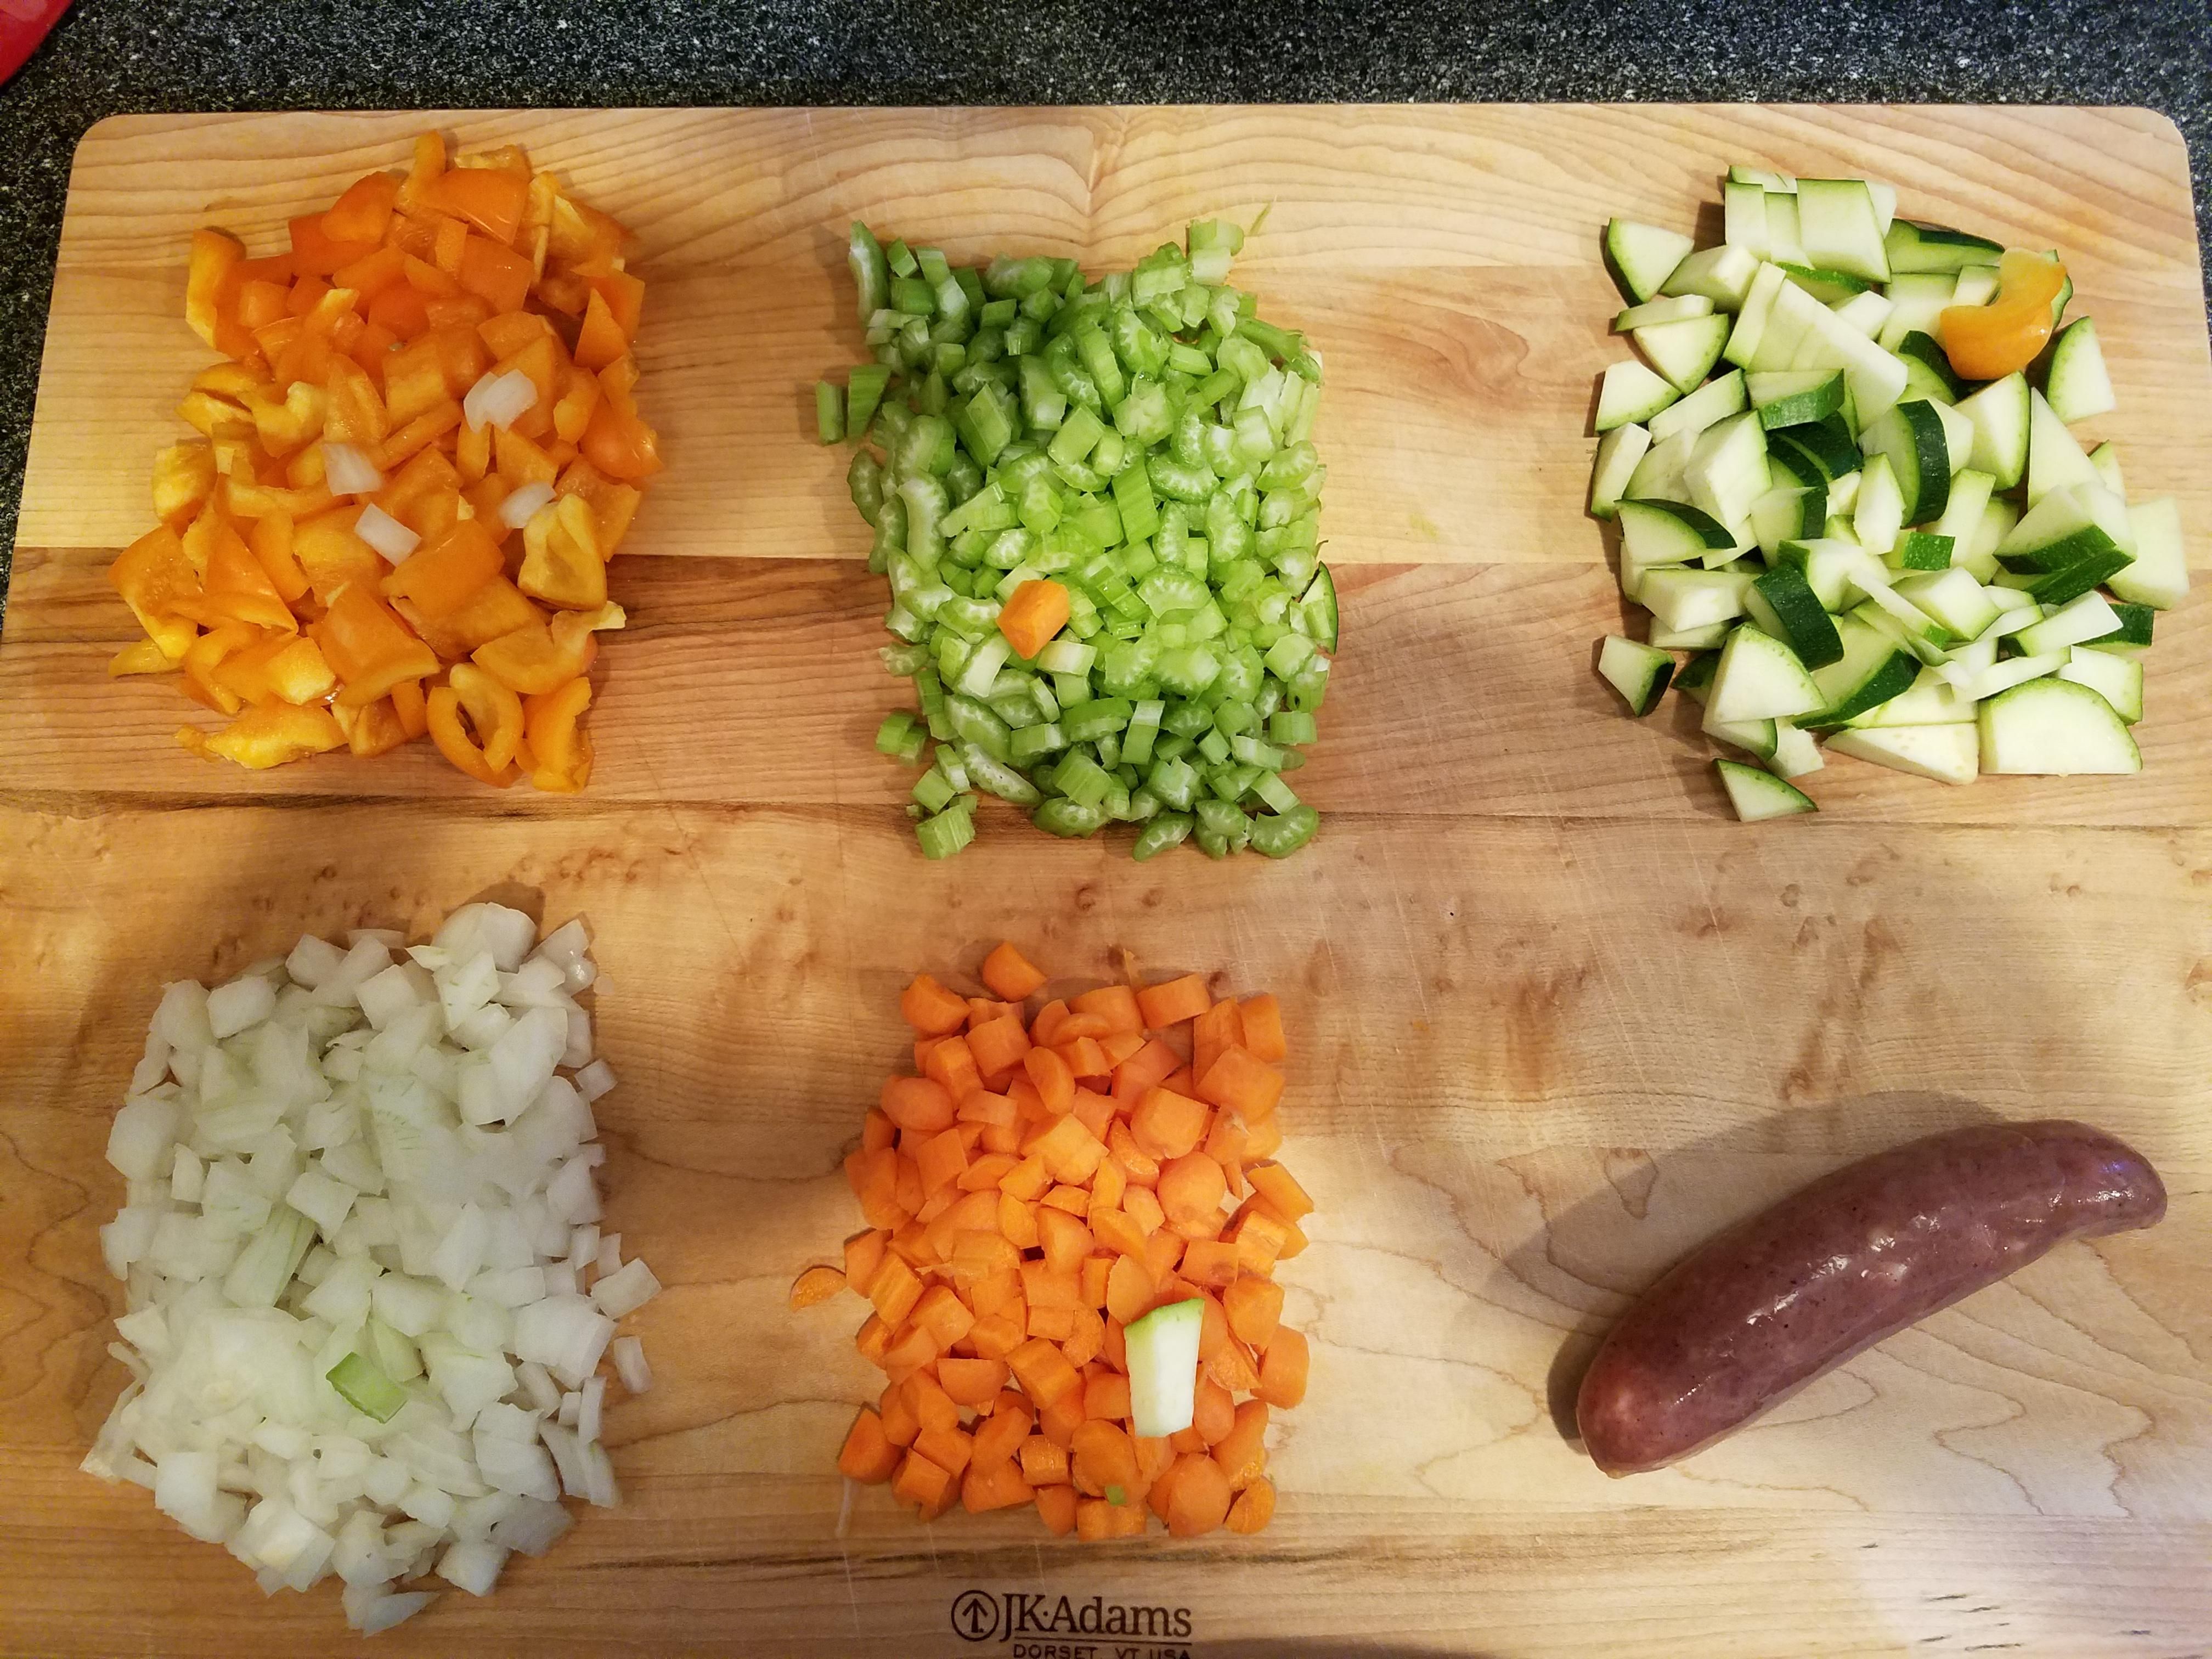 Prepping a meal for my OCD wife.